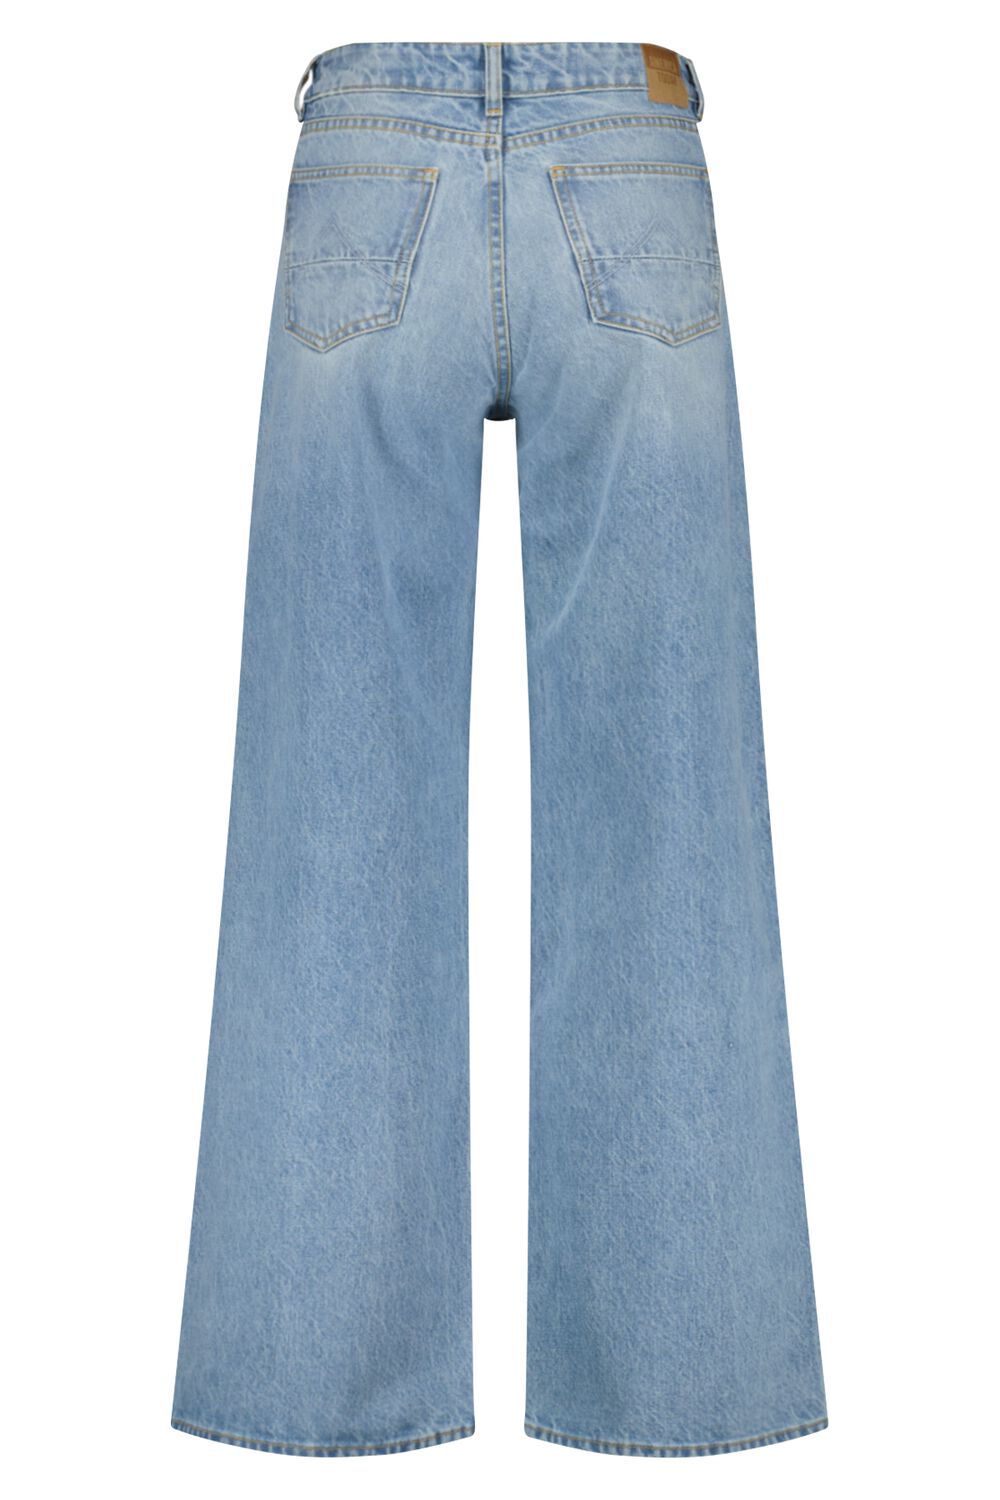 America Today Dames Jeans Seatle Blauw